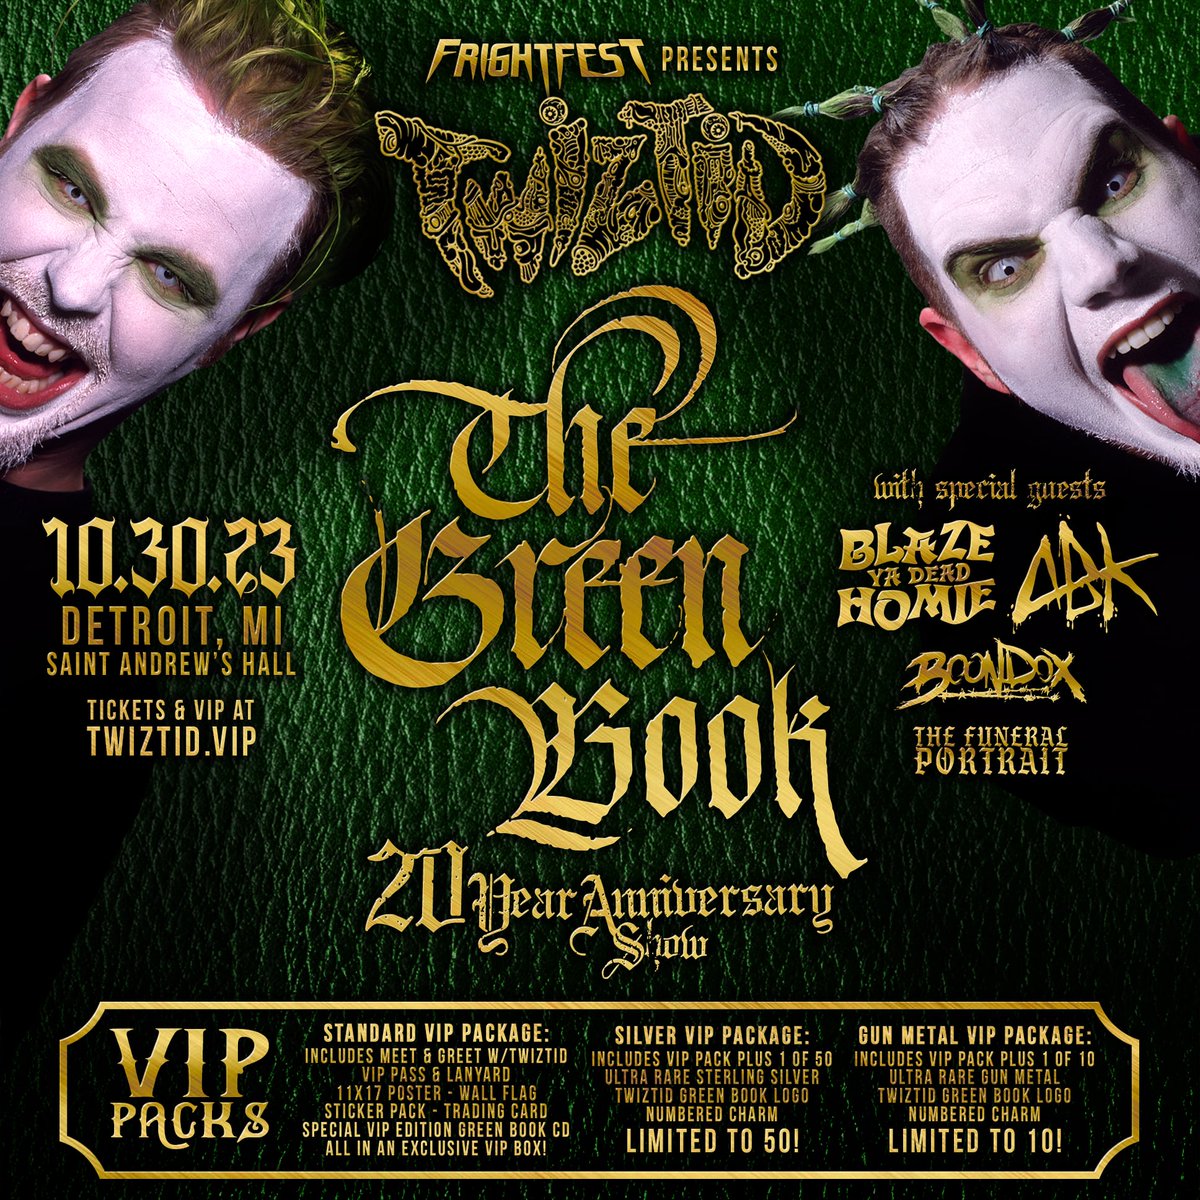 Can't wait for this one! Frightfest presents @tweetmesohard The Green Book 20 Year Anniversary Show, with special guests @blazeyadead1 , @Abkwarrior , @TFP_tweets and myself. 10.30.23 Detroit, MI at Saint Andrew's Hall. Tickets at twiztid.vip